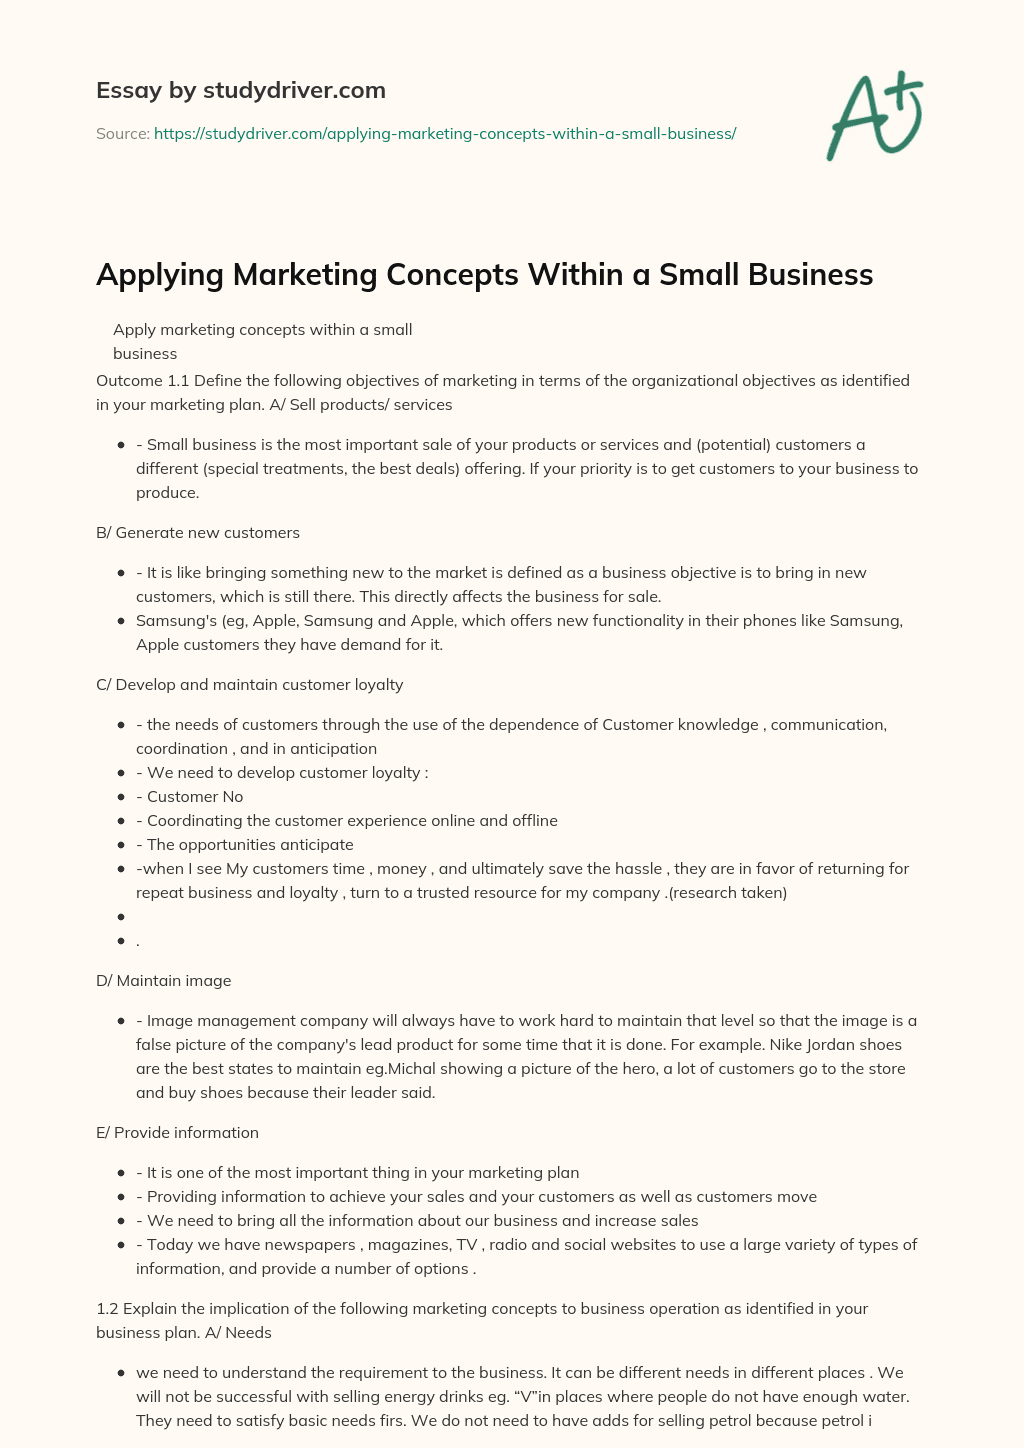 Applying Marketing Concepts Within a Small Business essay